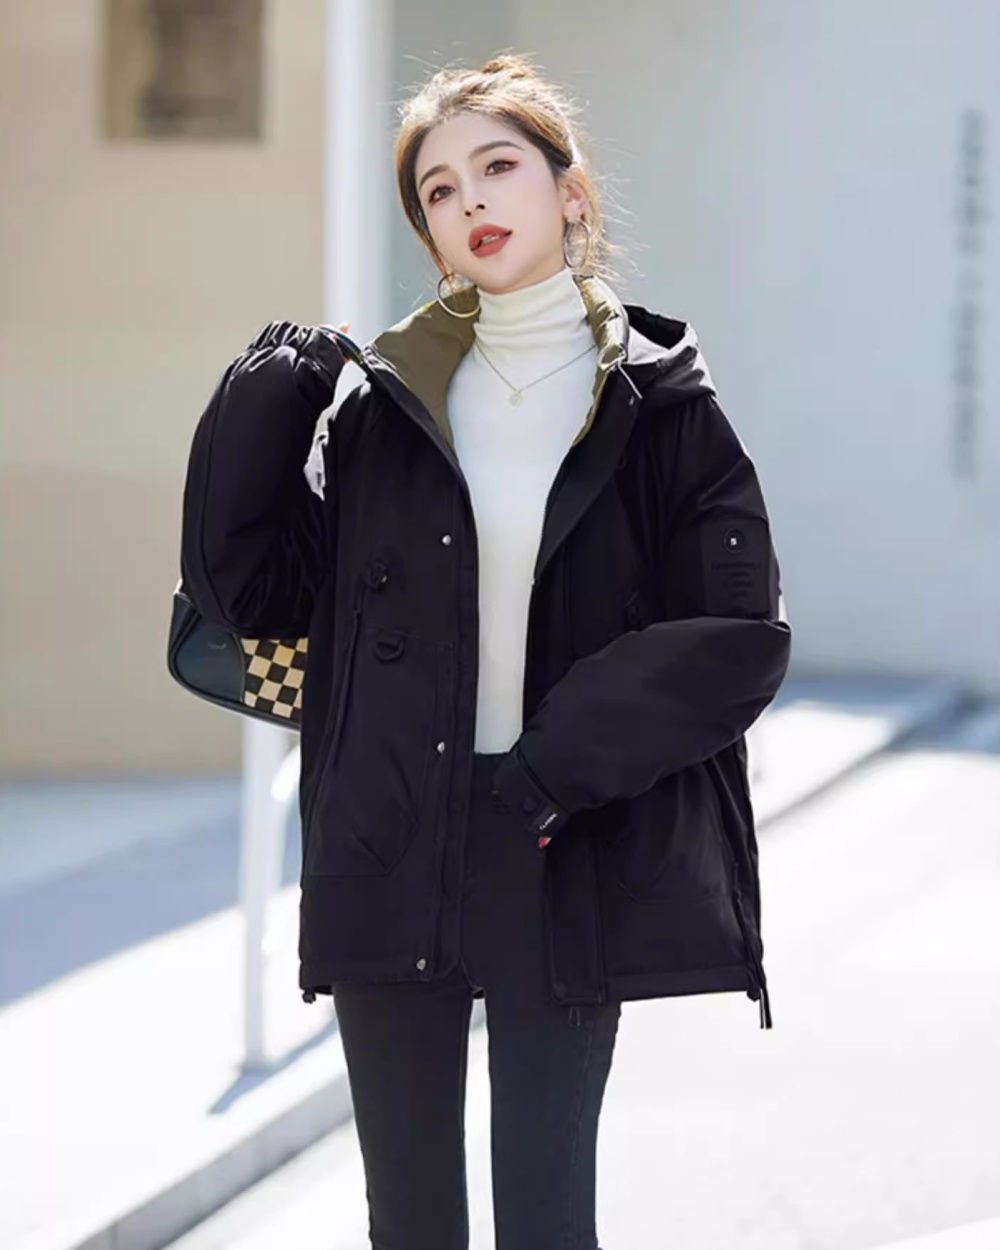 Hooded American style work clothing winter cotton coat